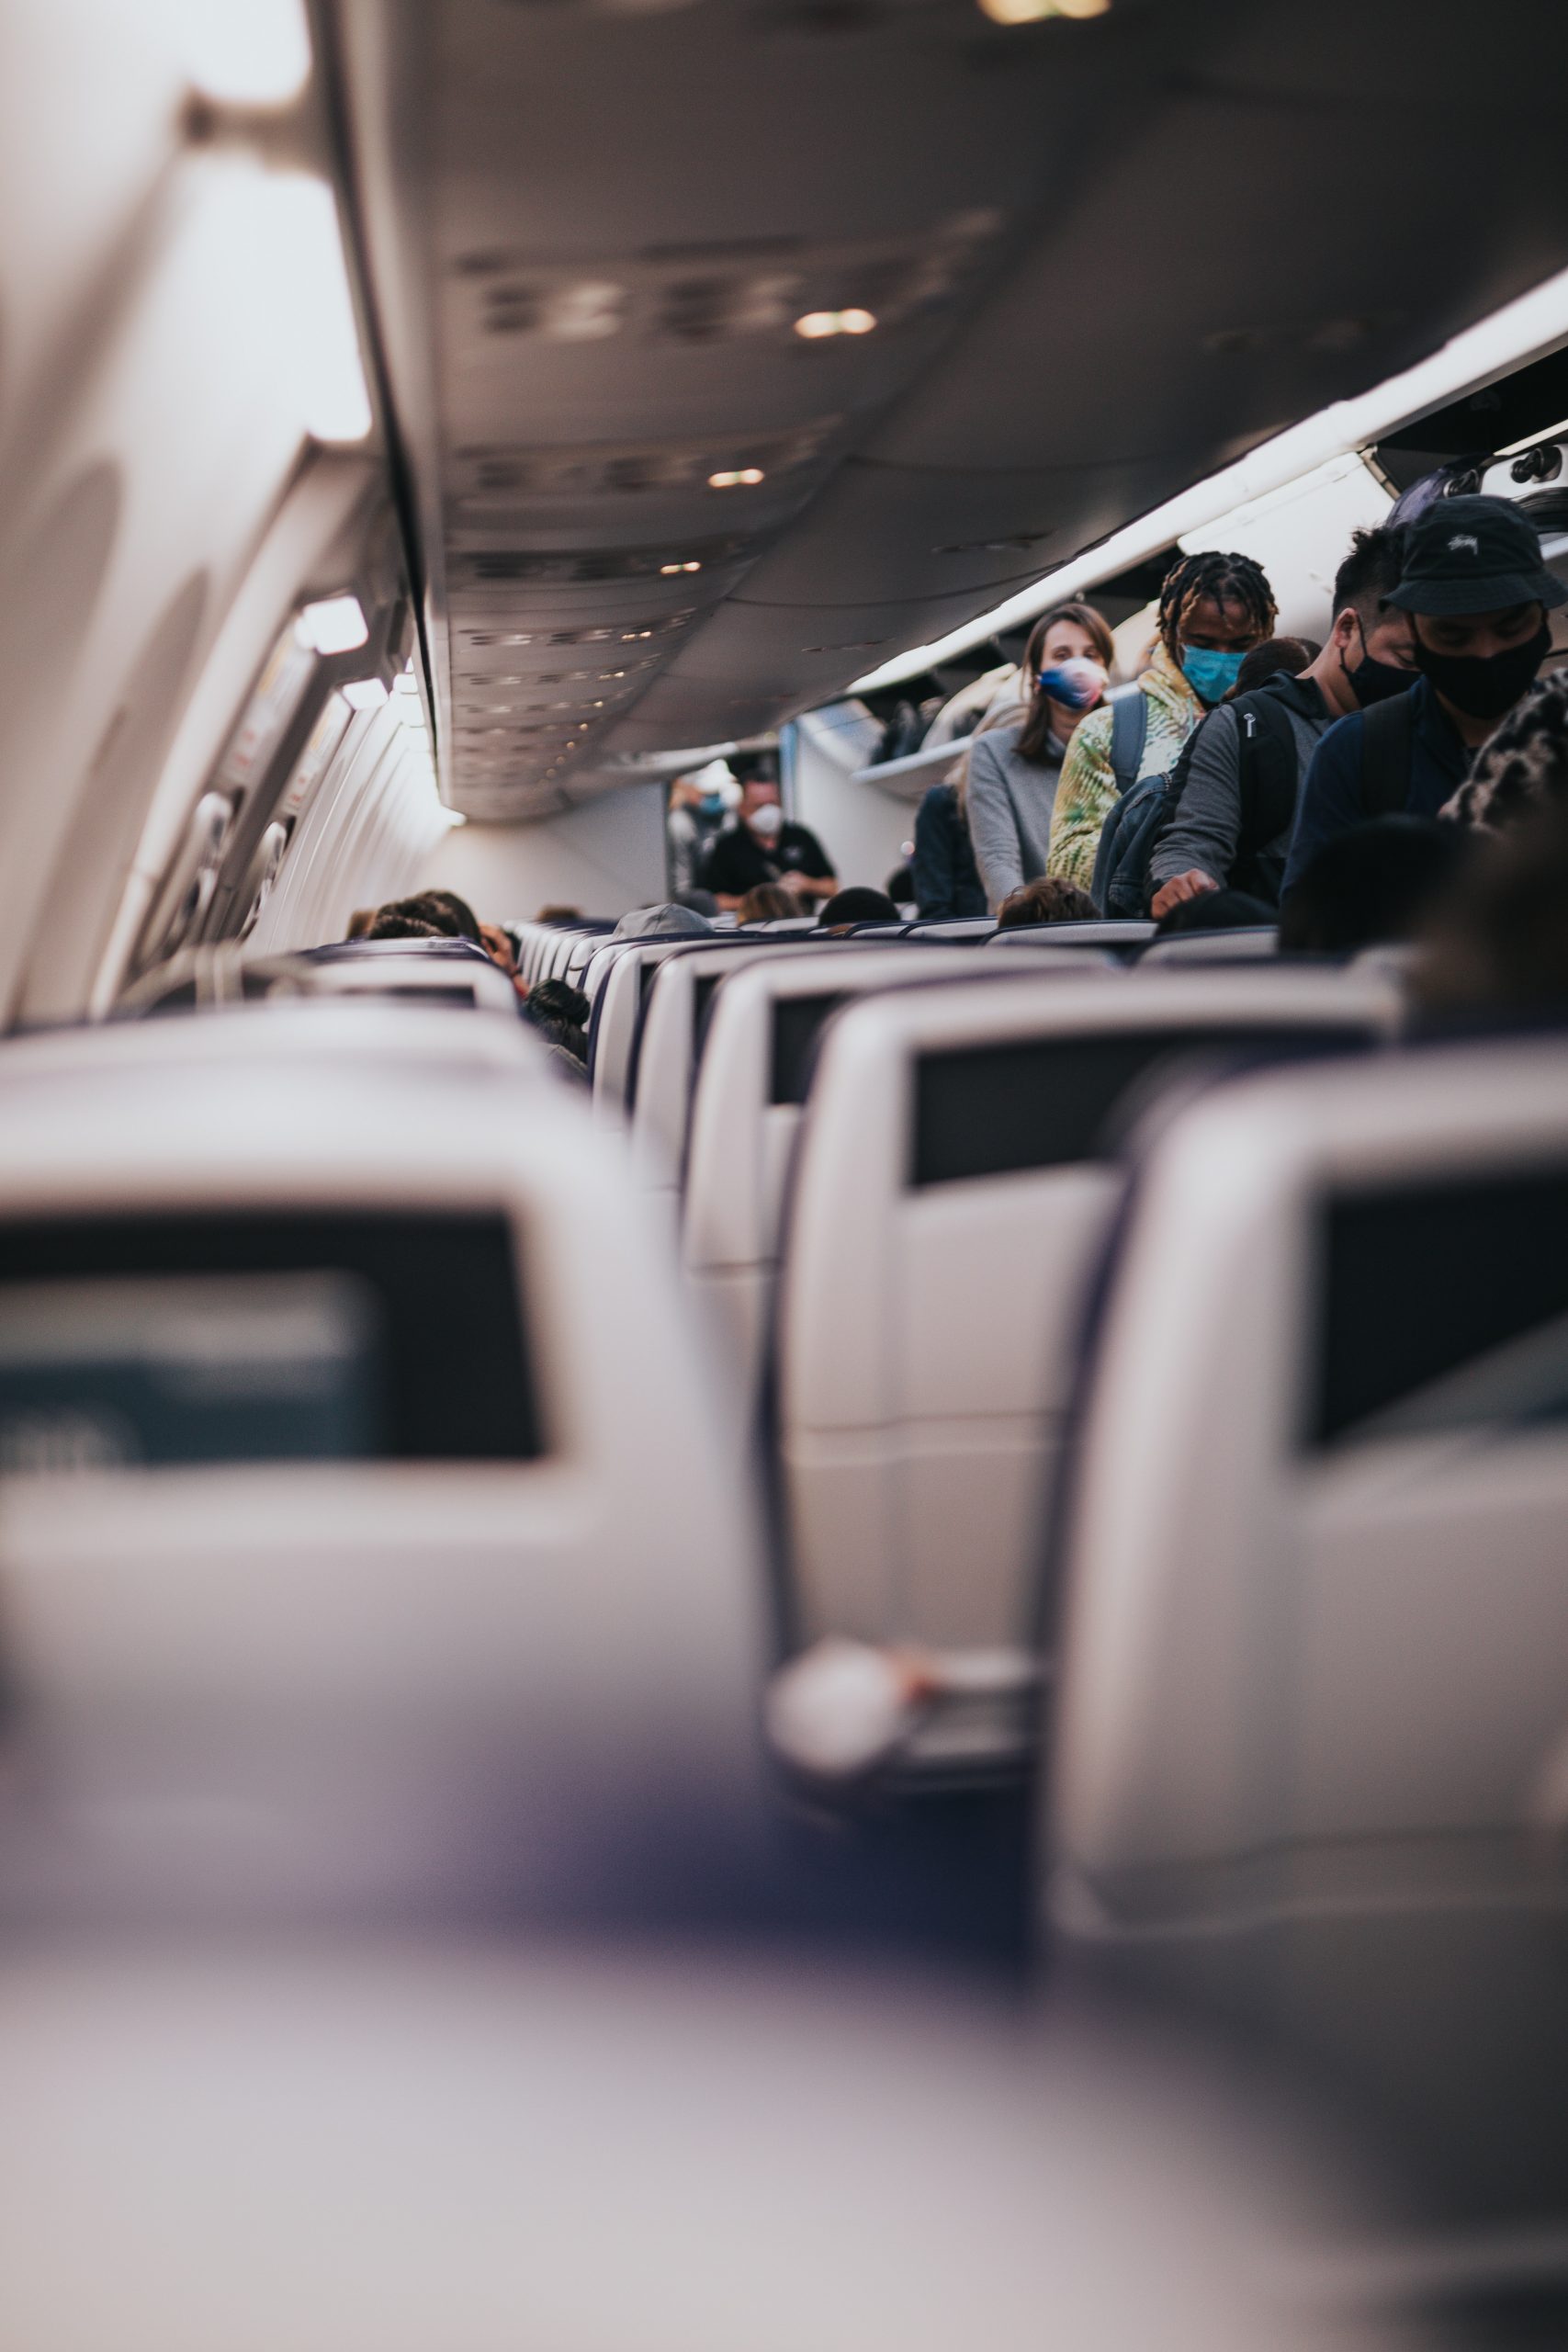 This image shows passengers boarding an airplane and lined up in the aisle while wearing masks.